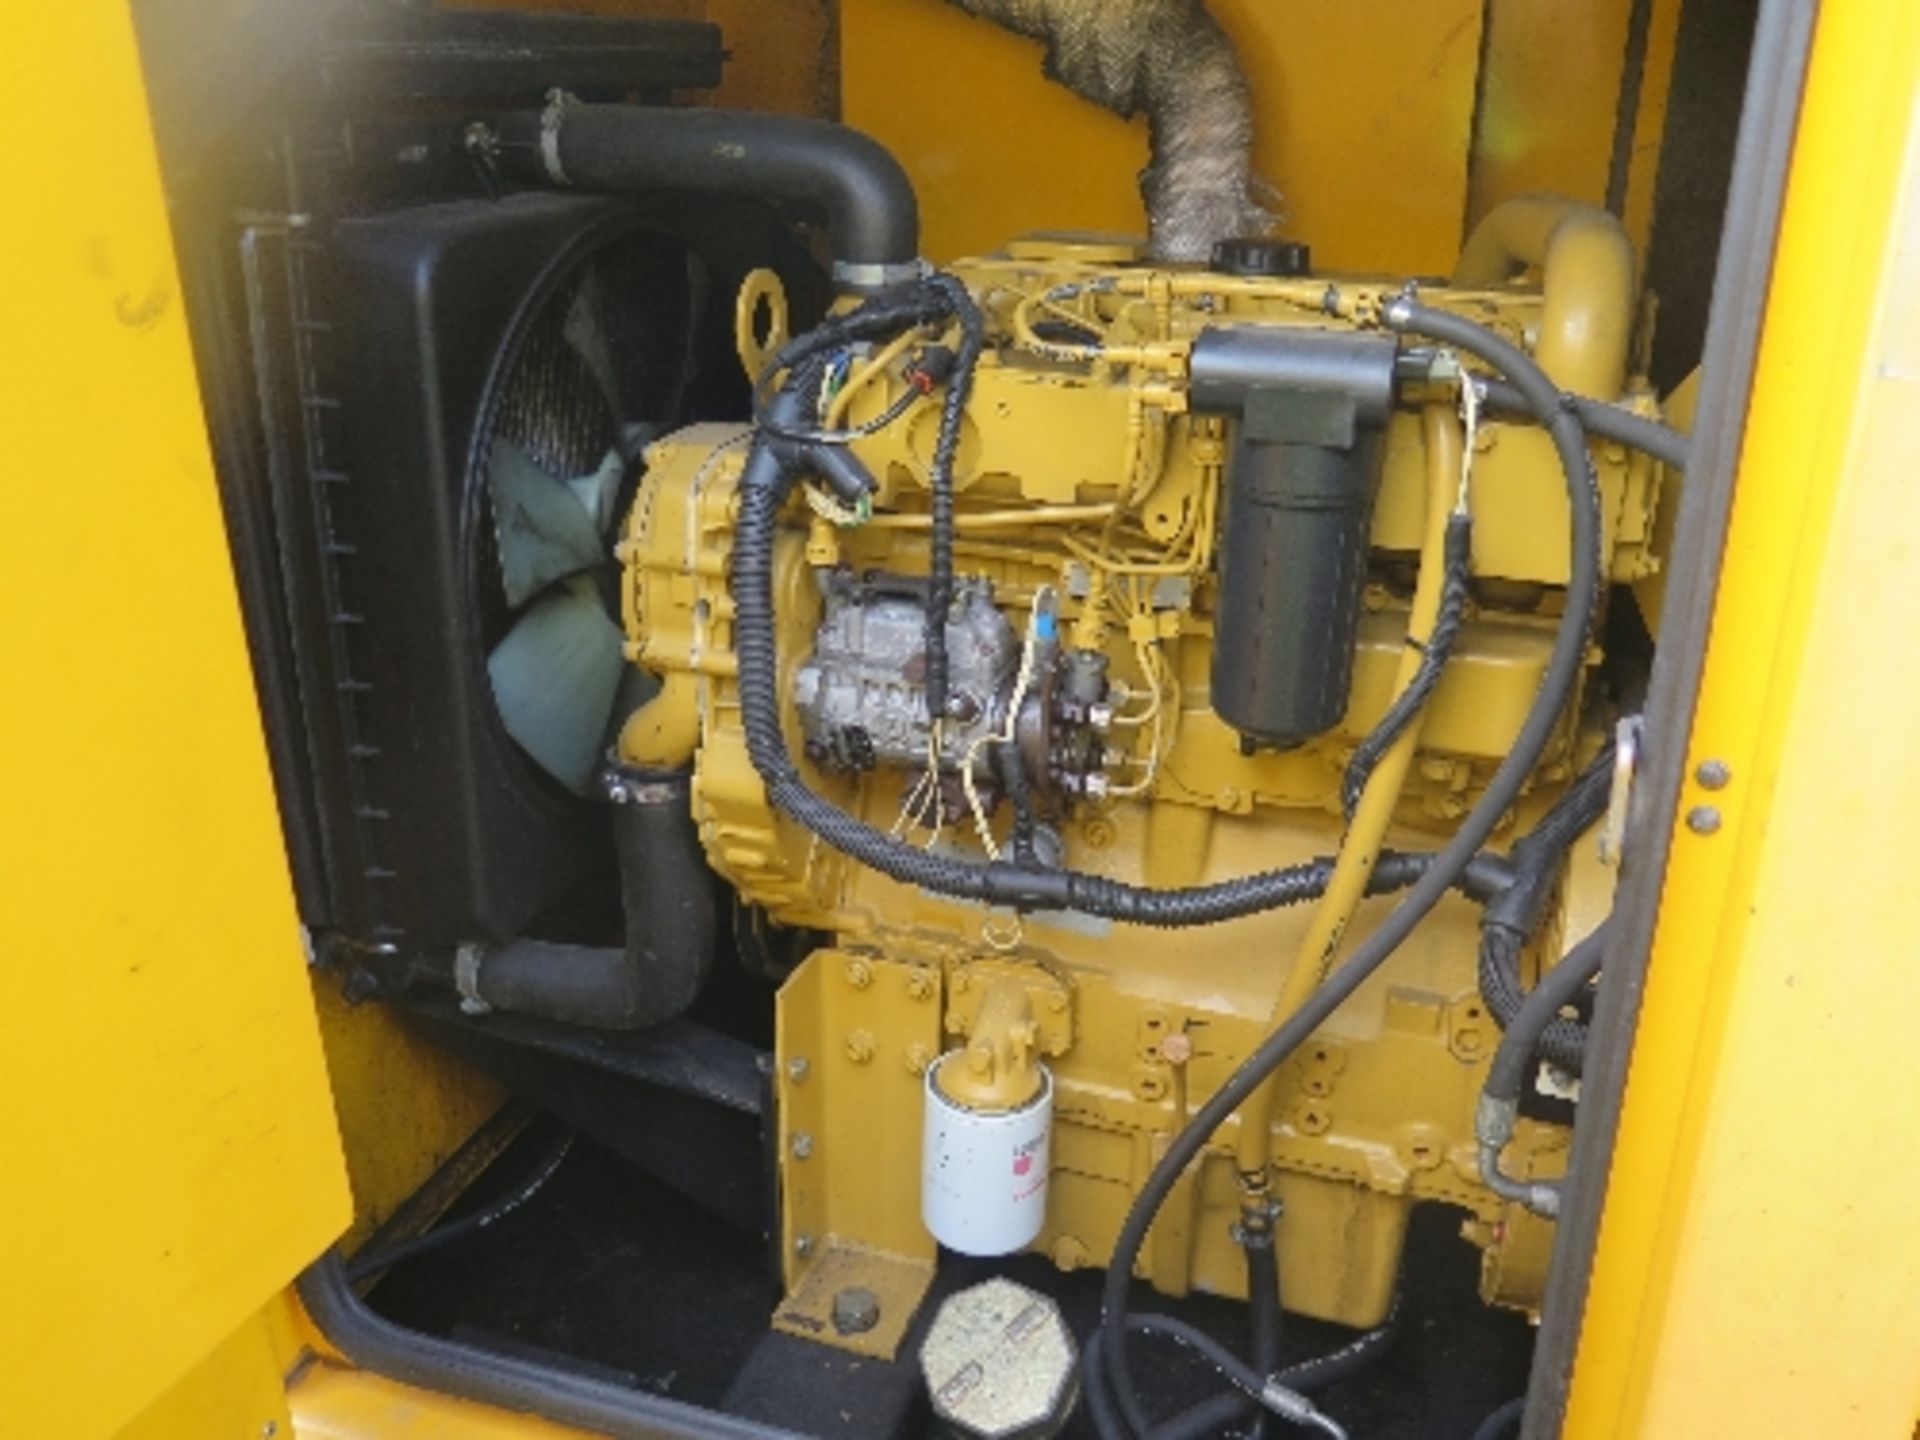 Caterpillar XQE80 generator 15335 hrs 157815
PERKINS - RUNS AND MAKES POWER
ALL LOTS are SOLD AS - Image 3 of 6